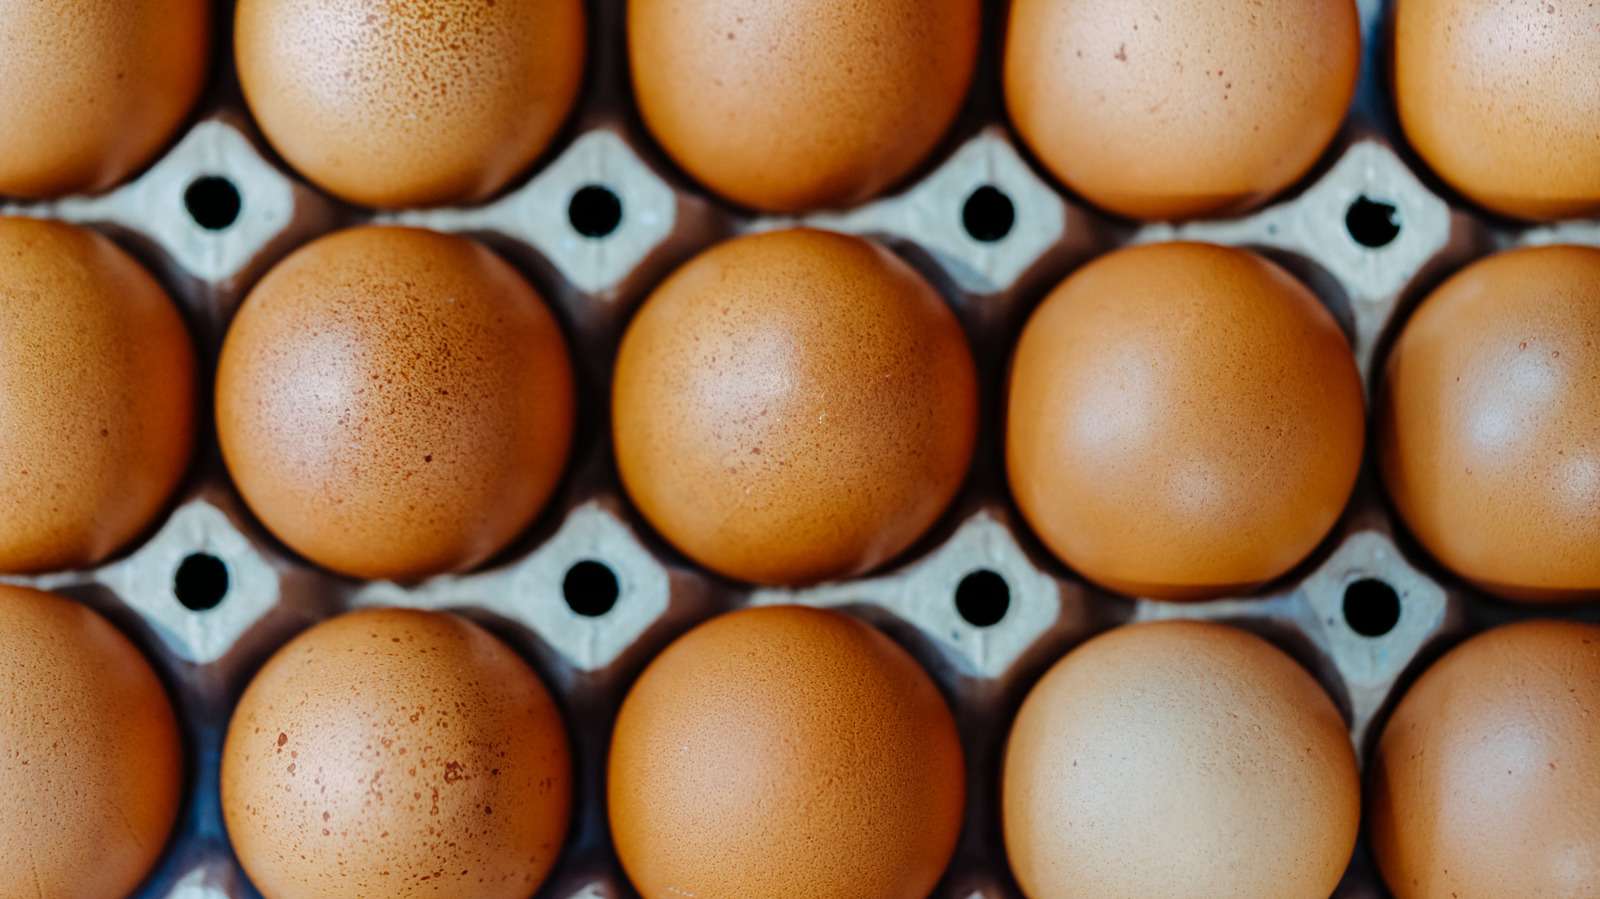 Can You Eat Eggs If You Have IBS?